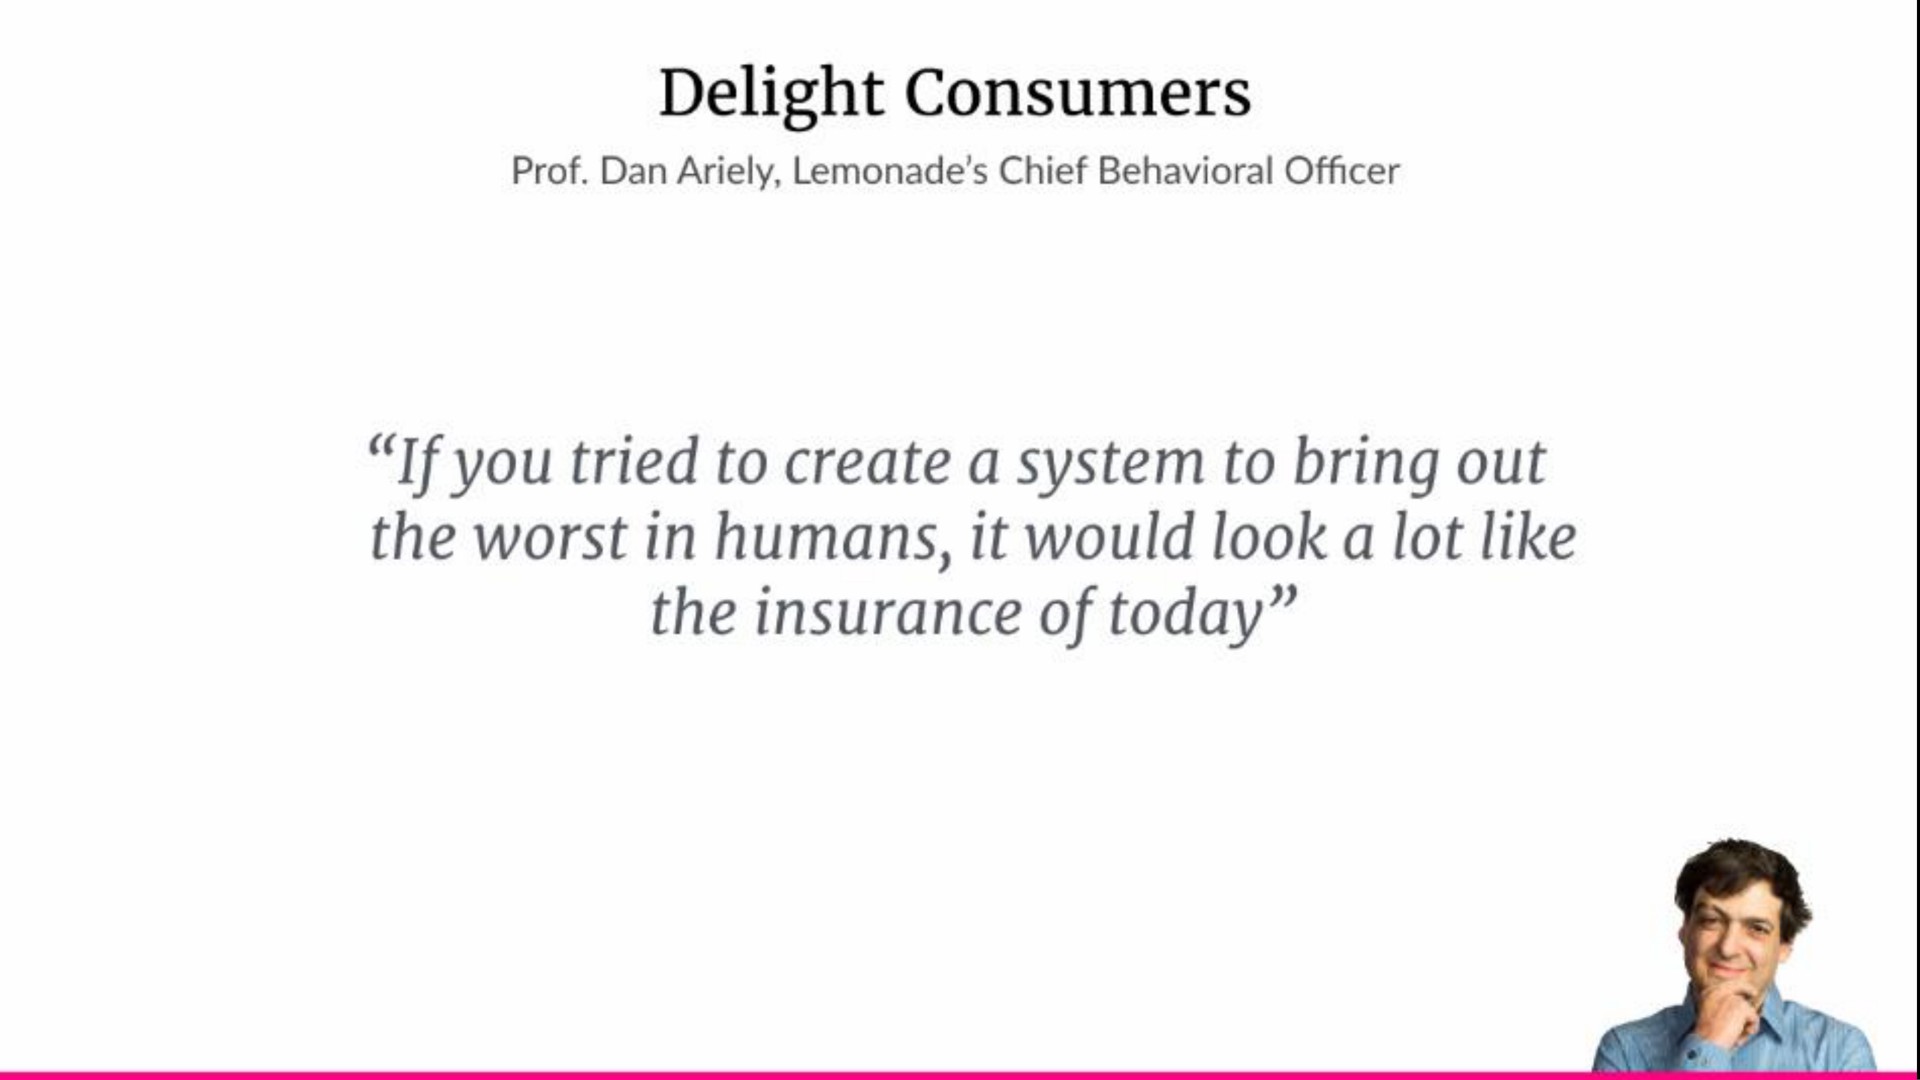 delight consumers if you tried to create a system to bring out the worst in humans it would look a lot like the insurance of today | Lemonade